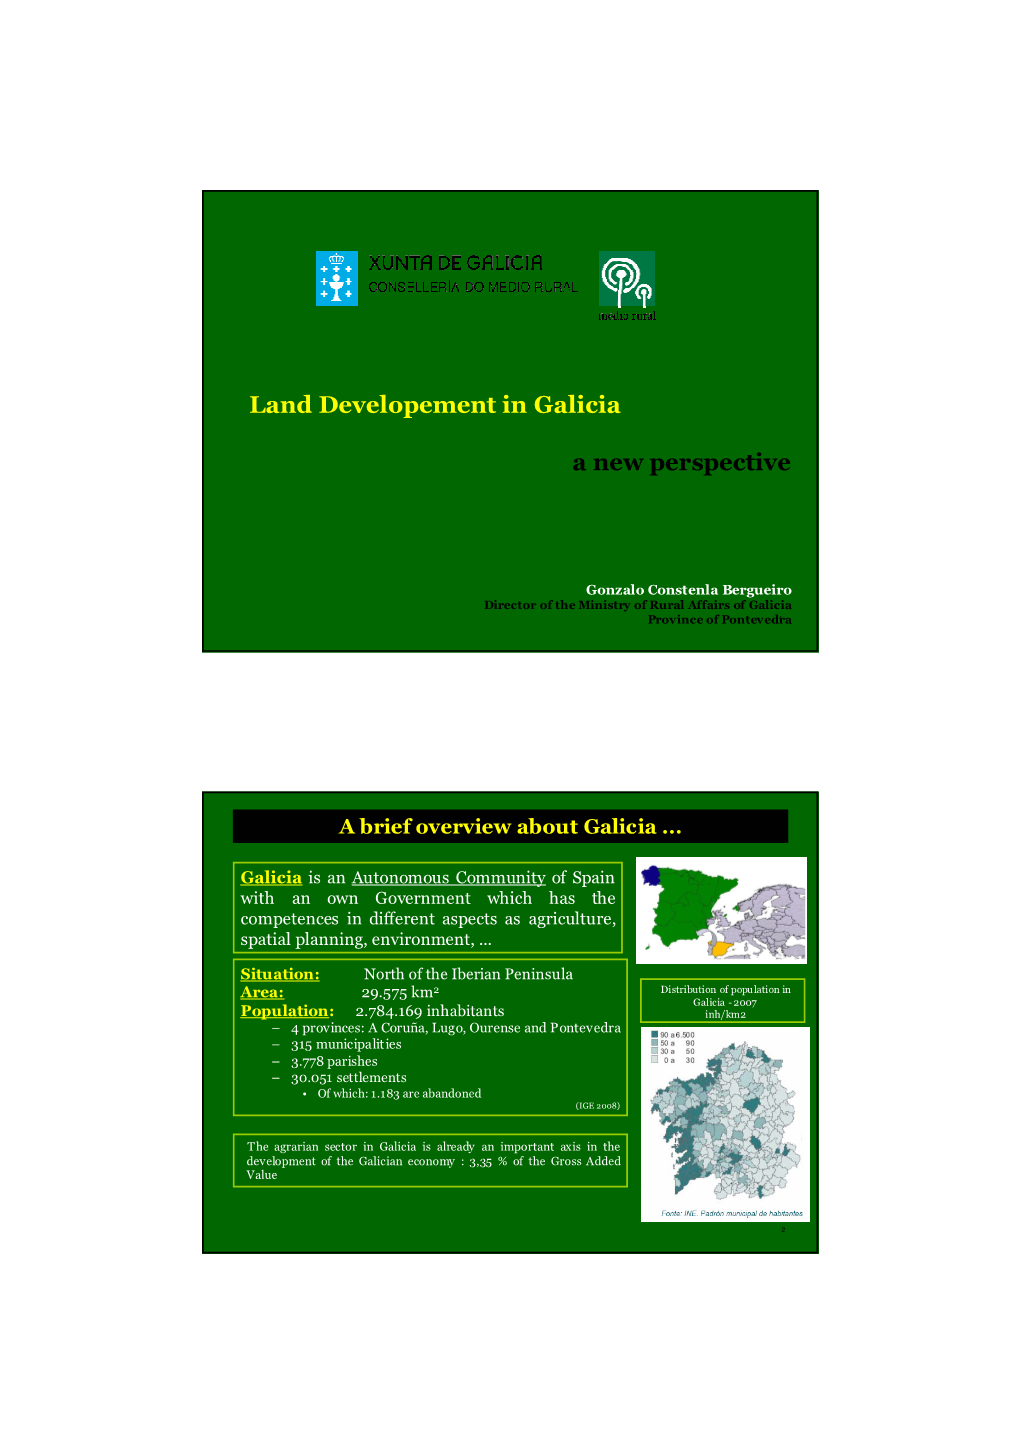 Land Developement in Galicia a New Perspective